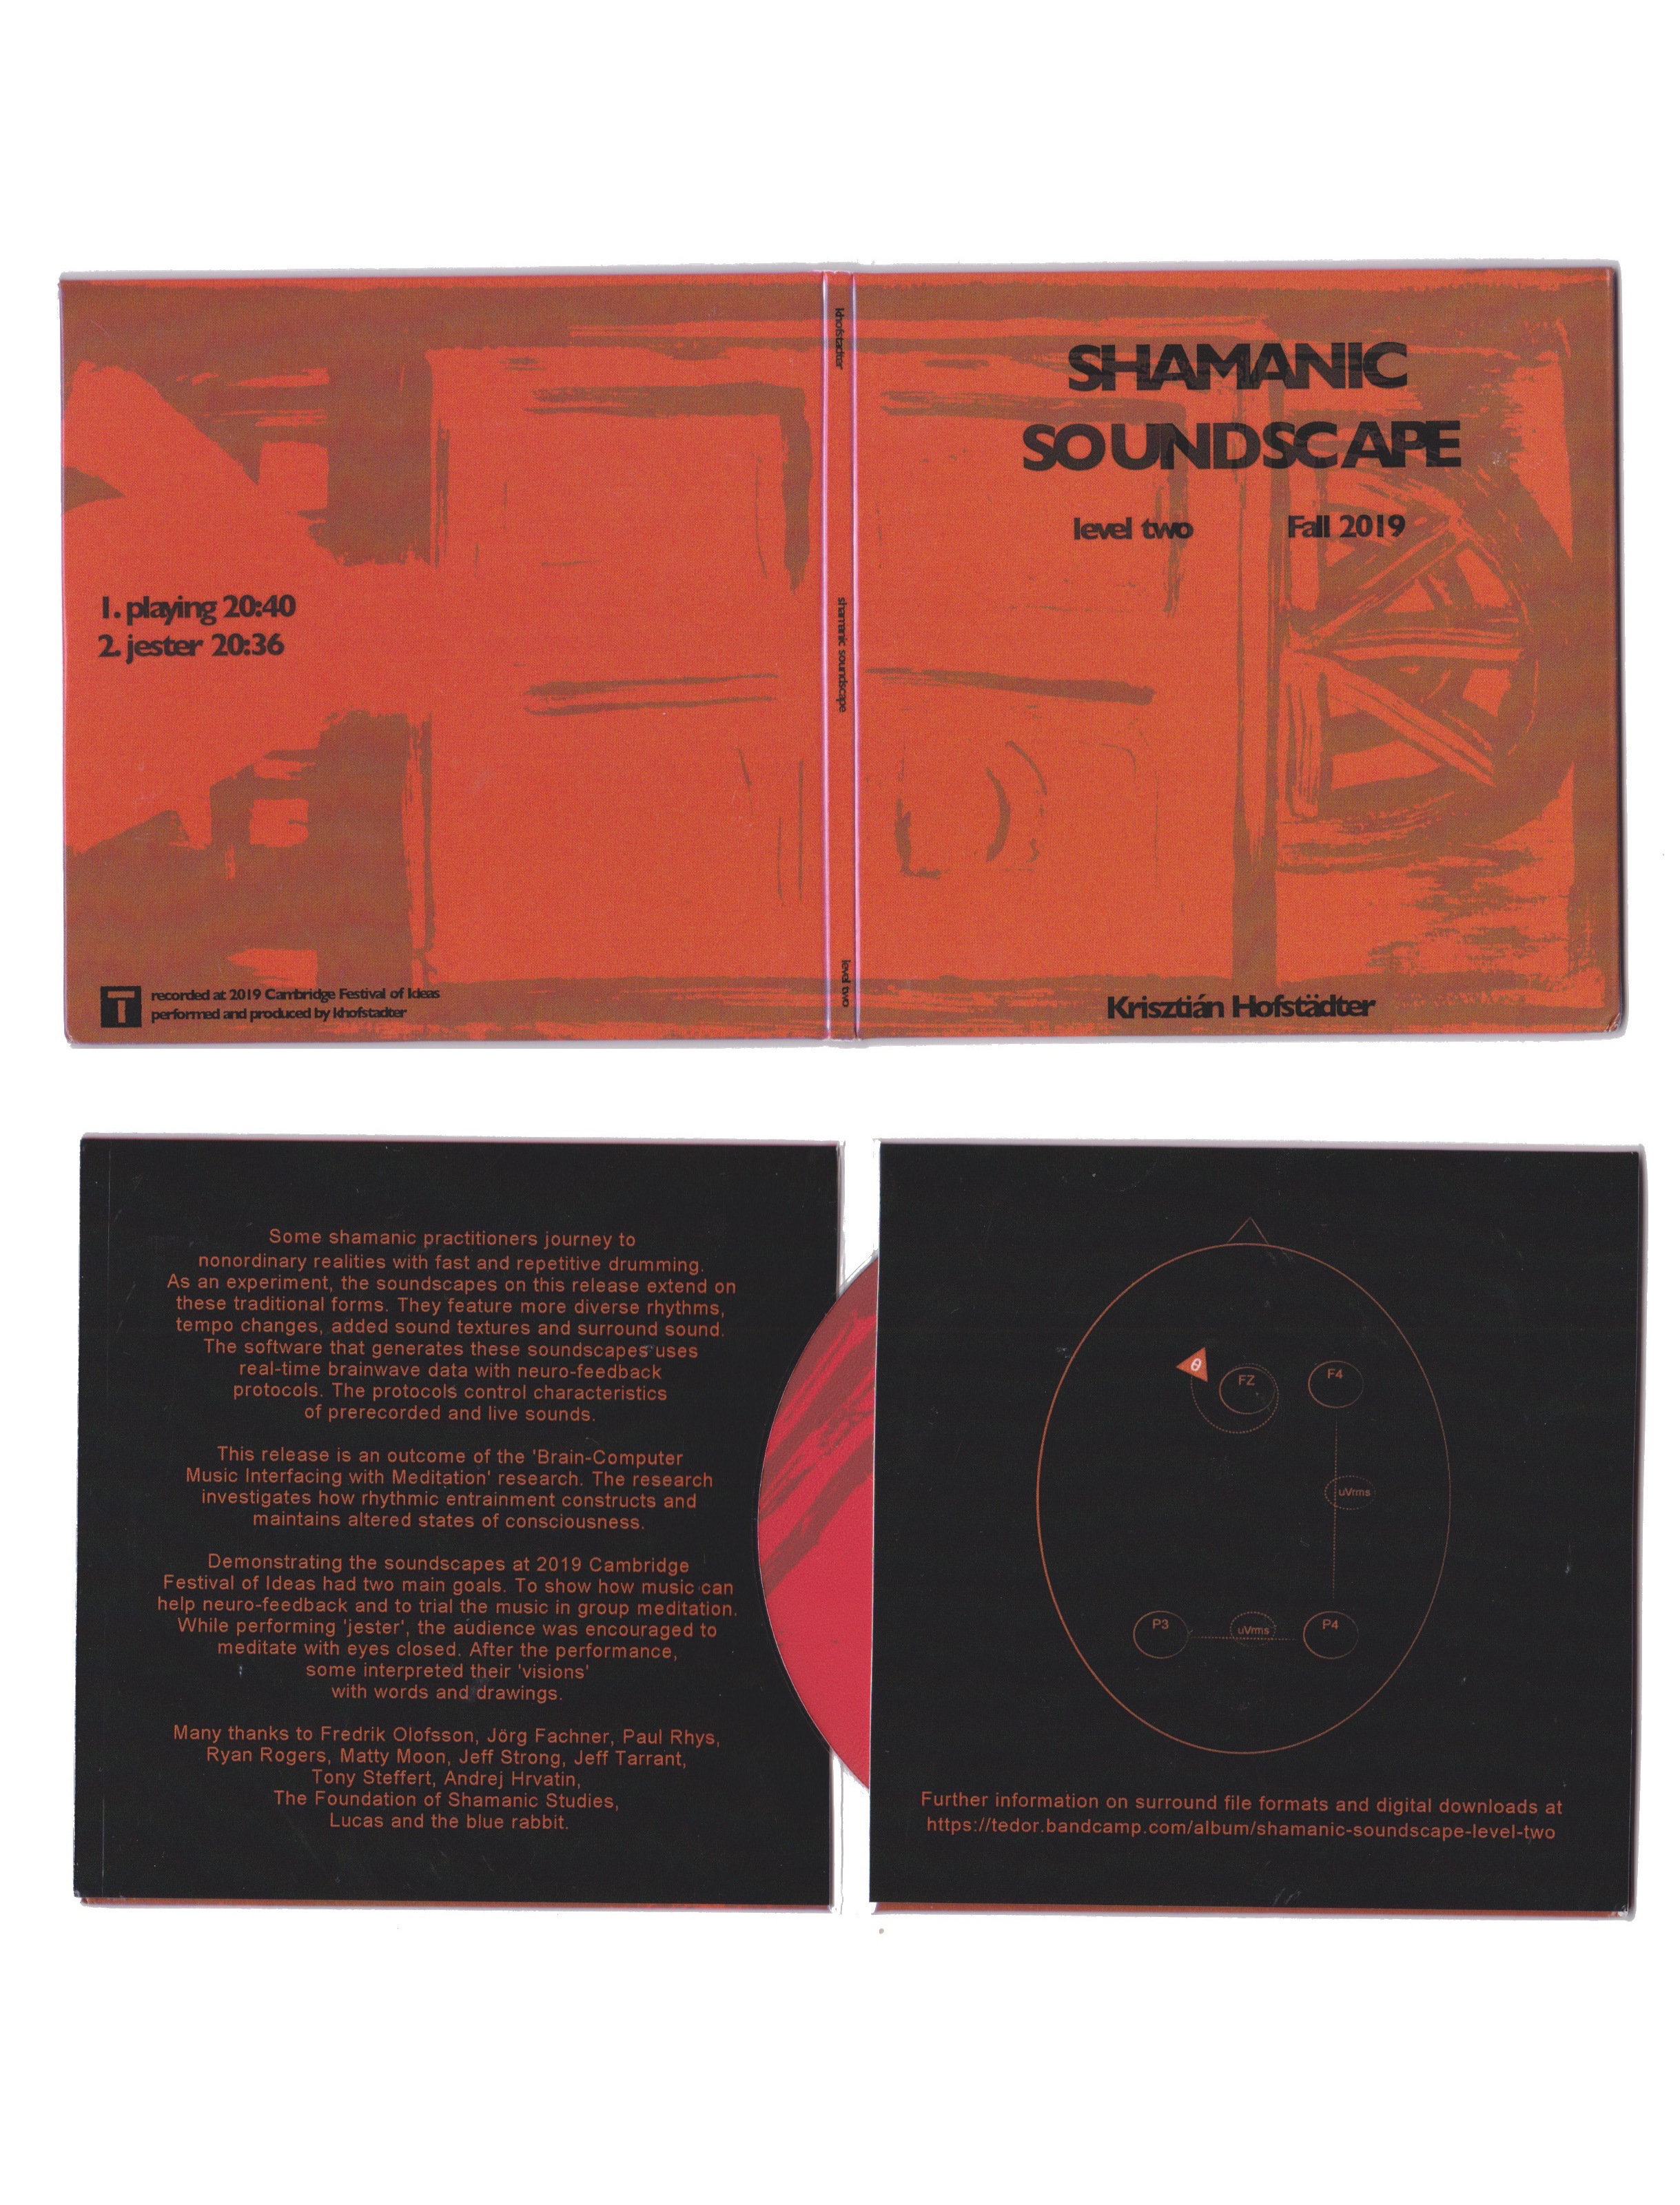 Digipack release of *Shamanic Soundscape - Level Two*.